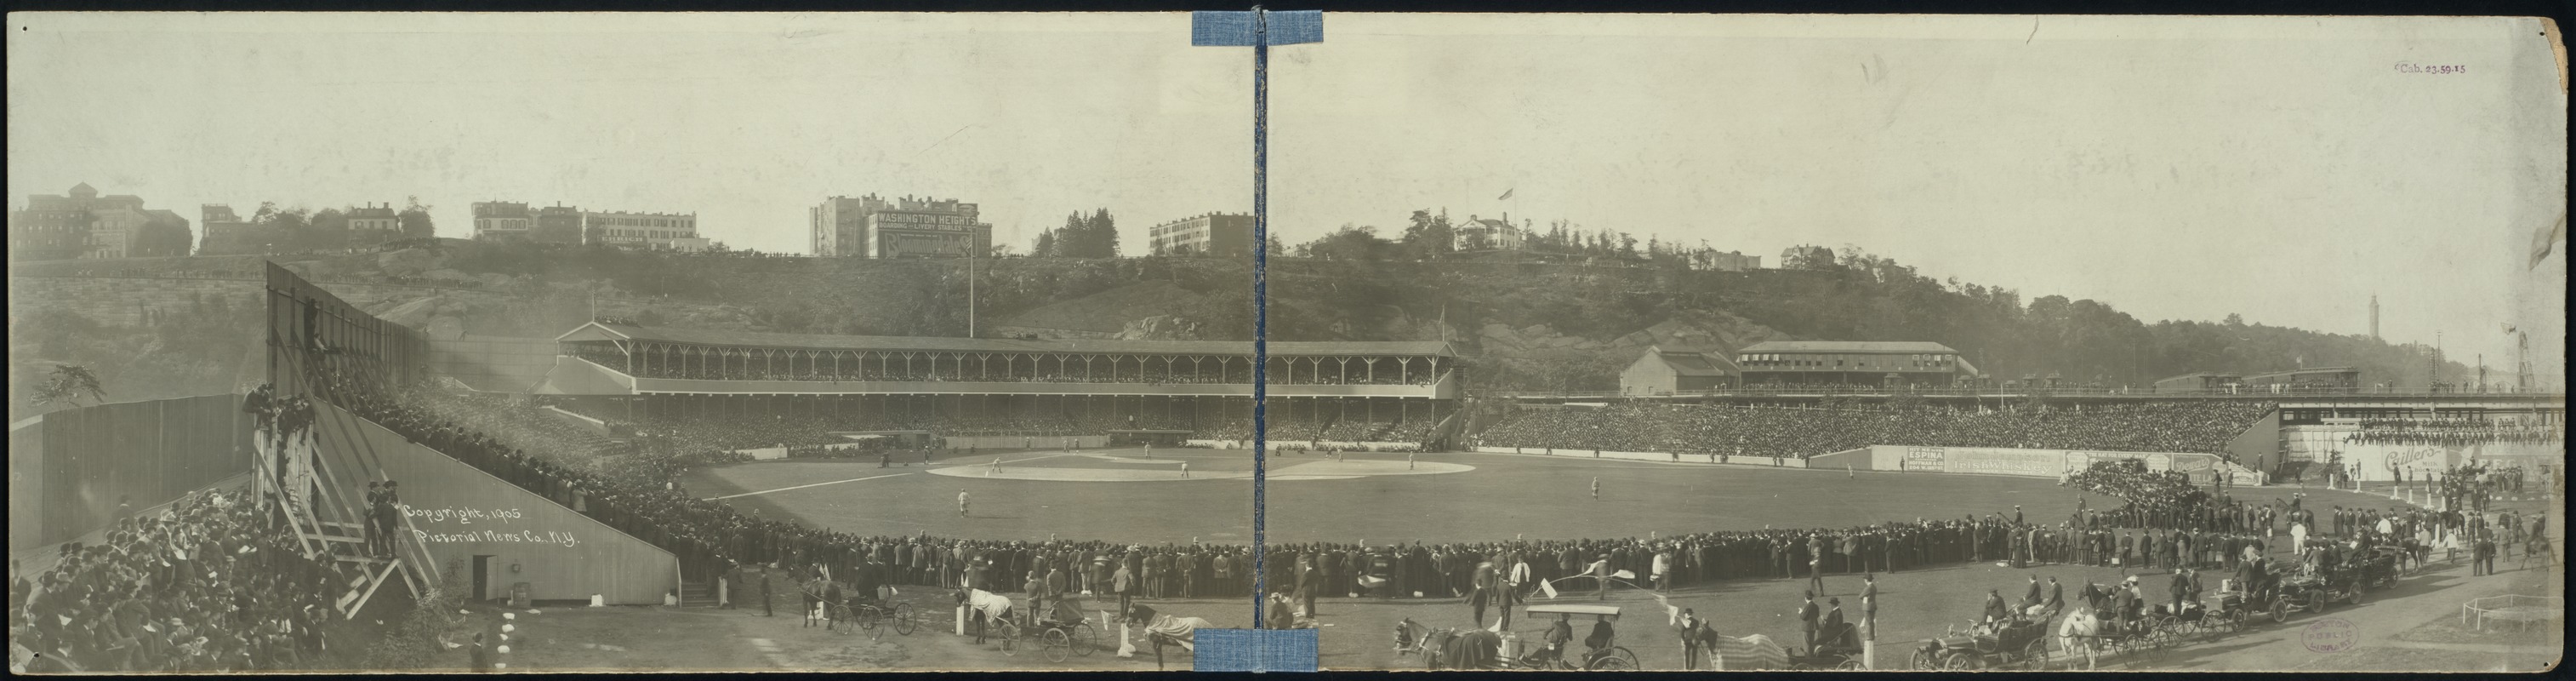 The Polo Grounds, New York, 1905 World Series